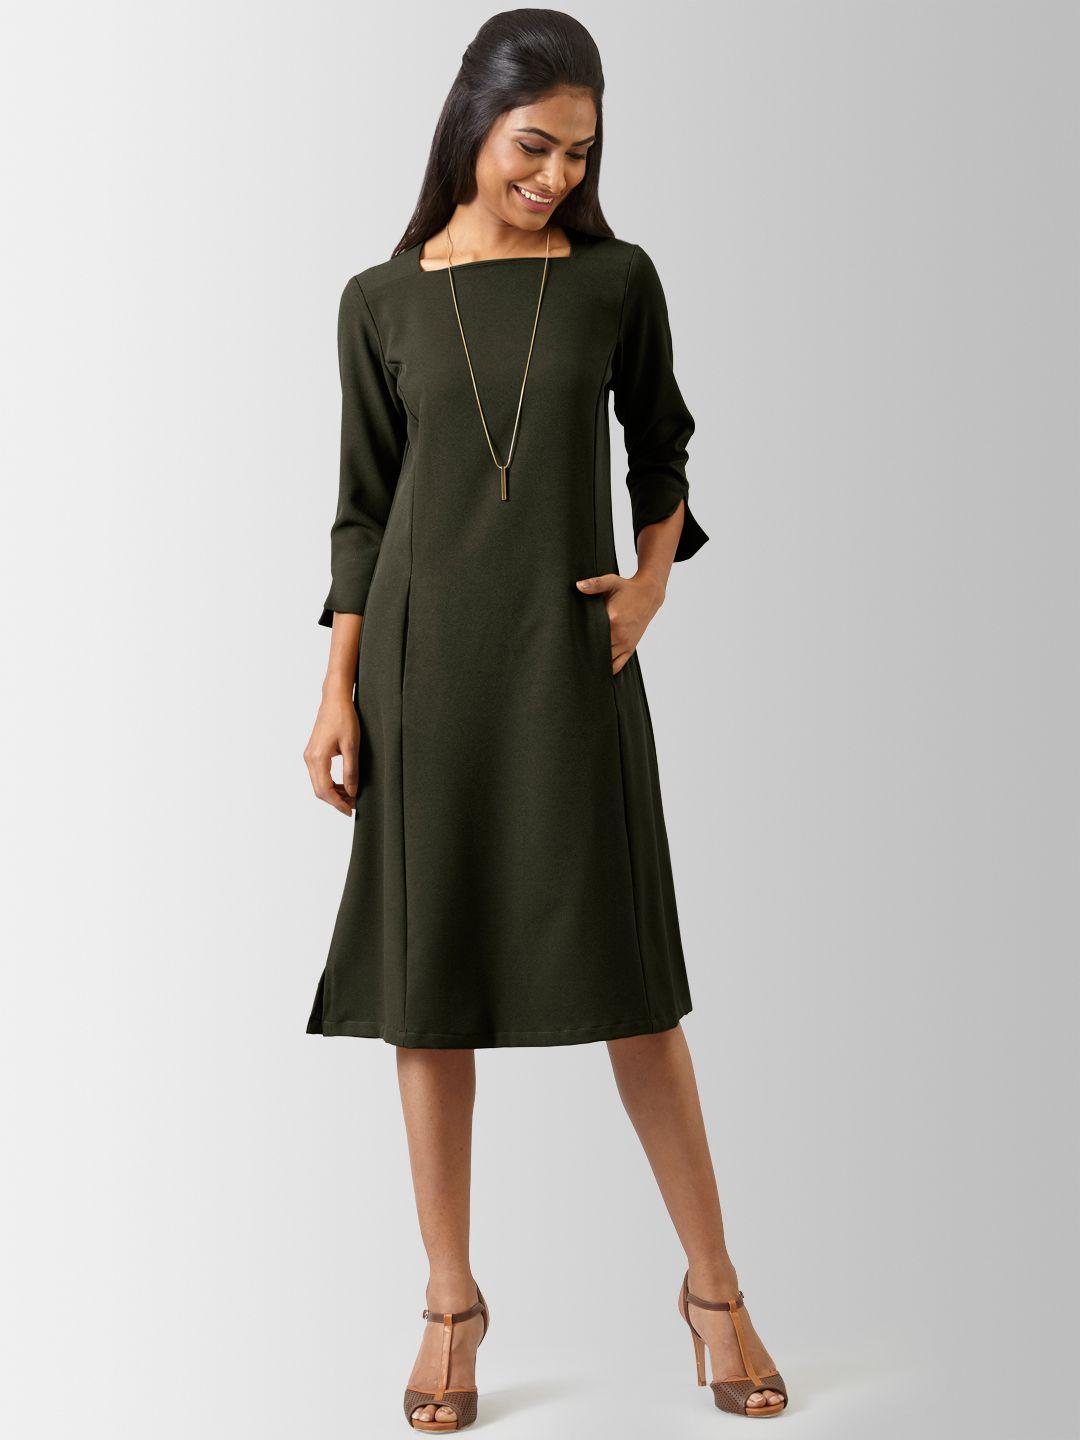 fablestreet women solid olive green a-line dress